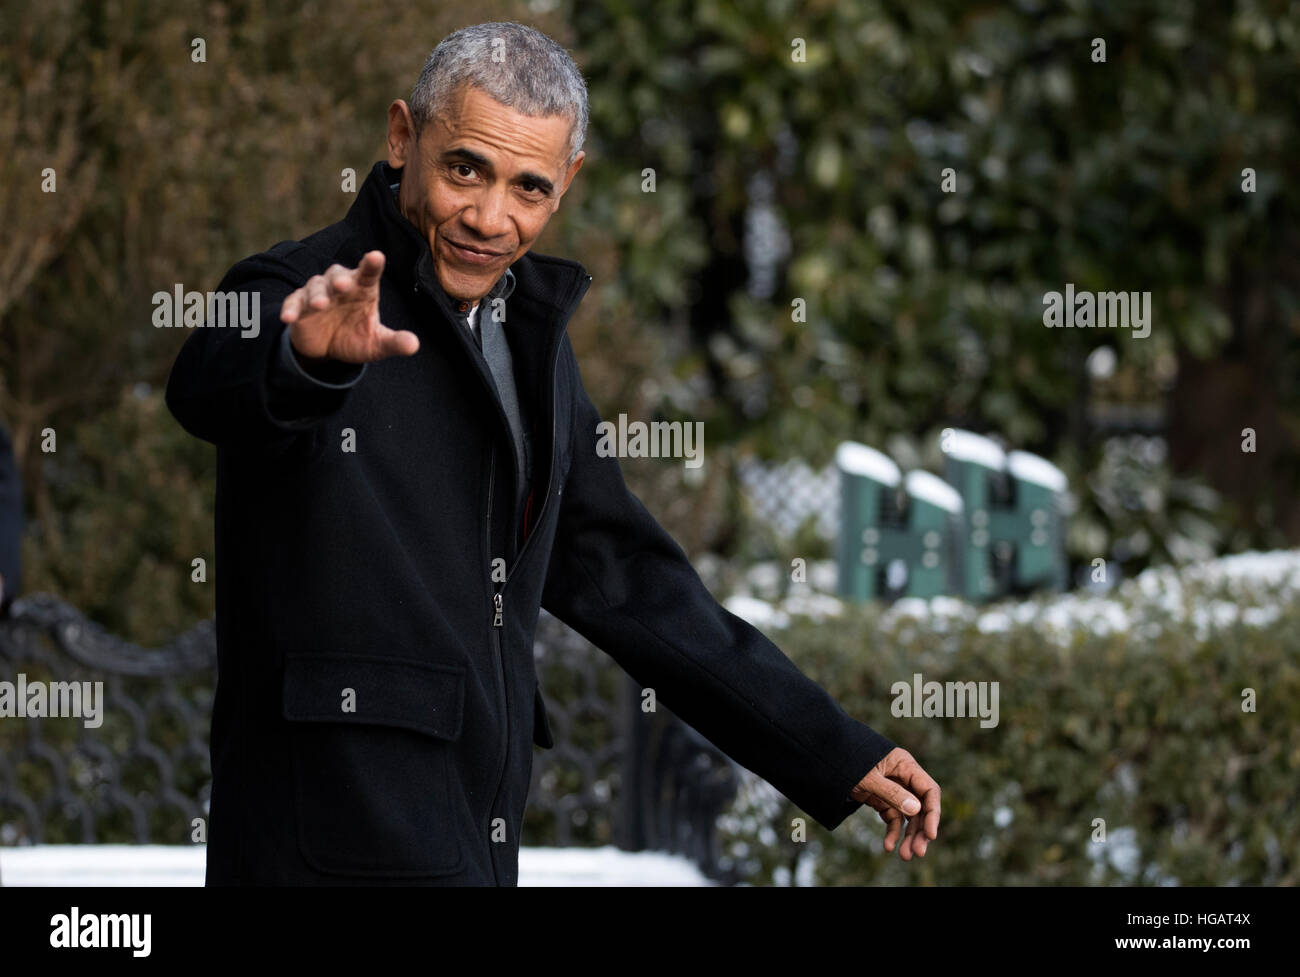 Washington, DC, USA. 07th Jan, 2017. US President Barack Obama walks to board Marine One on the South Lawn of the White House in Washington, DC, USA, 07 January 2017. President Obama is departing the White House for an evening trip to Florida to attend a wedding. © MediaPunch Inc/Alamy Live News Stock Photo